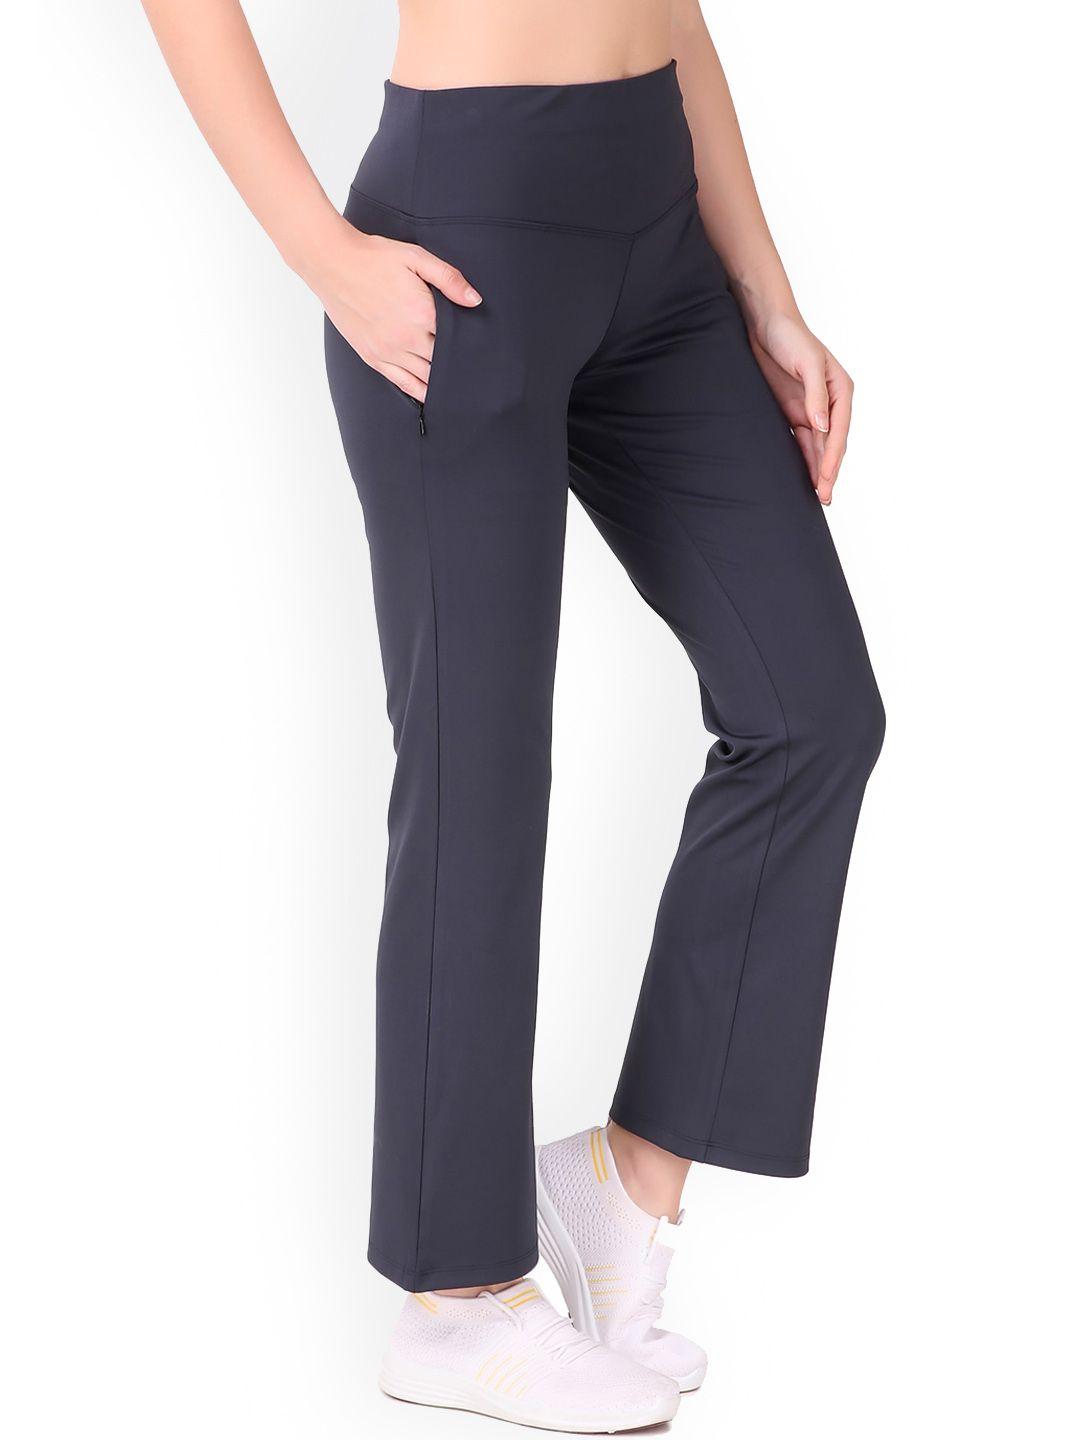 redesign-women-mid-rise-bootcut-dry-fit-yoga-track-pant